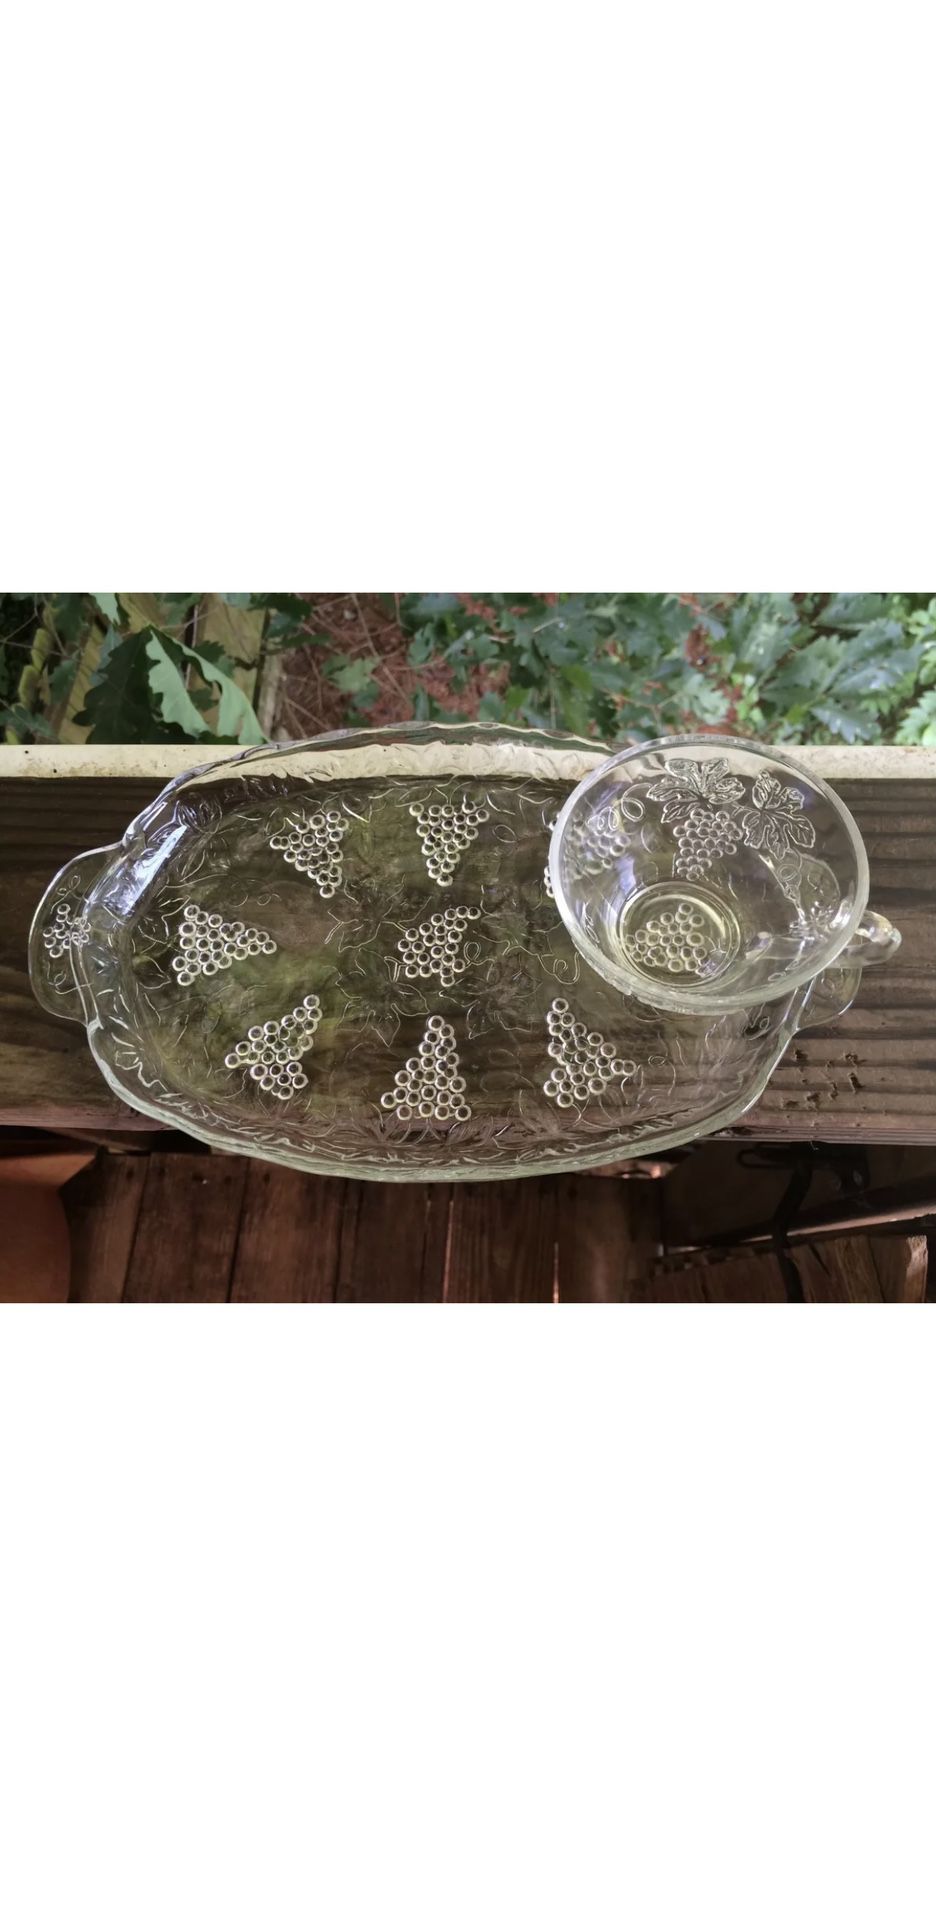 Vintage Clear Glass Serving Snack Trays With Tea Cup And Grape Pattern Design